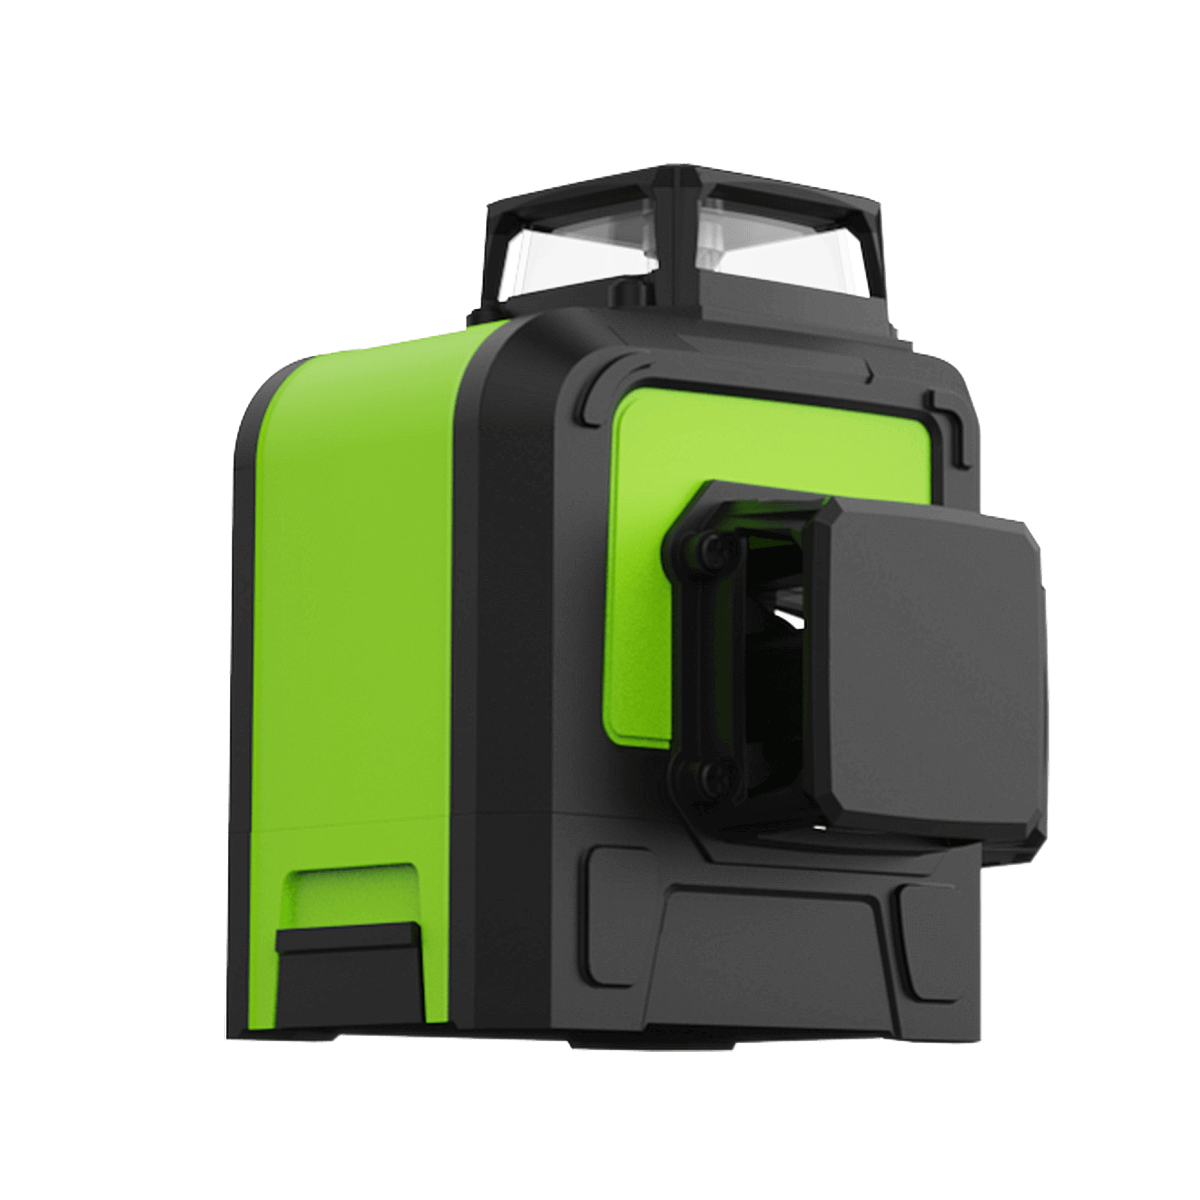 Huepar 3x360 Green Beam 3d Laser Level With Bluetooth Connectivity Cross  Lines Three-plane Self-leveling Tools & Hard Carry Case - Laser Levels -  AliExpress